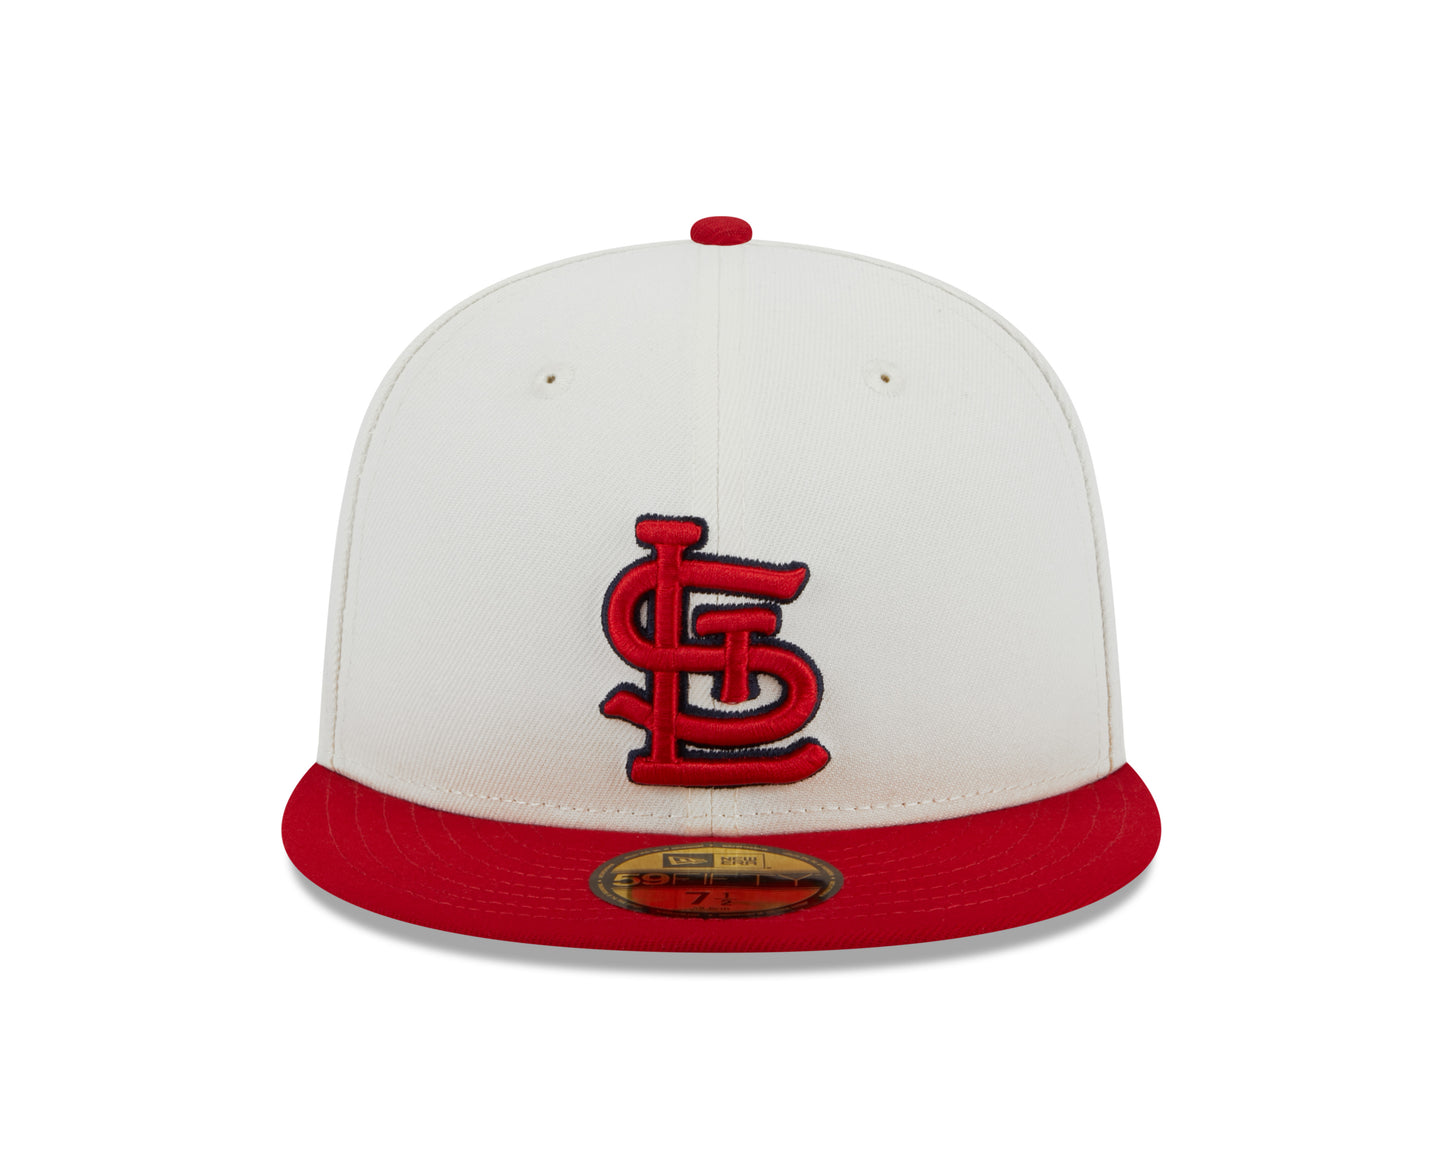 St. Louis Cardinals 2011 World Series Cream/Red New Era Retro 59FIFTY Fitted Hat